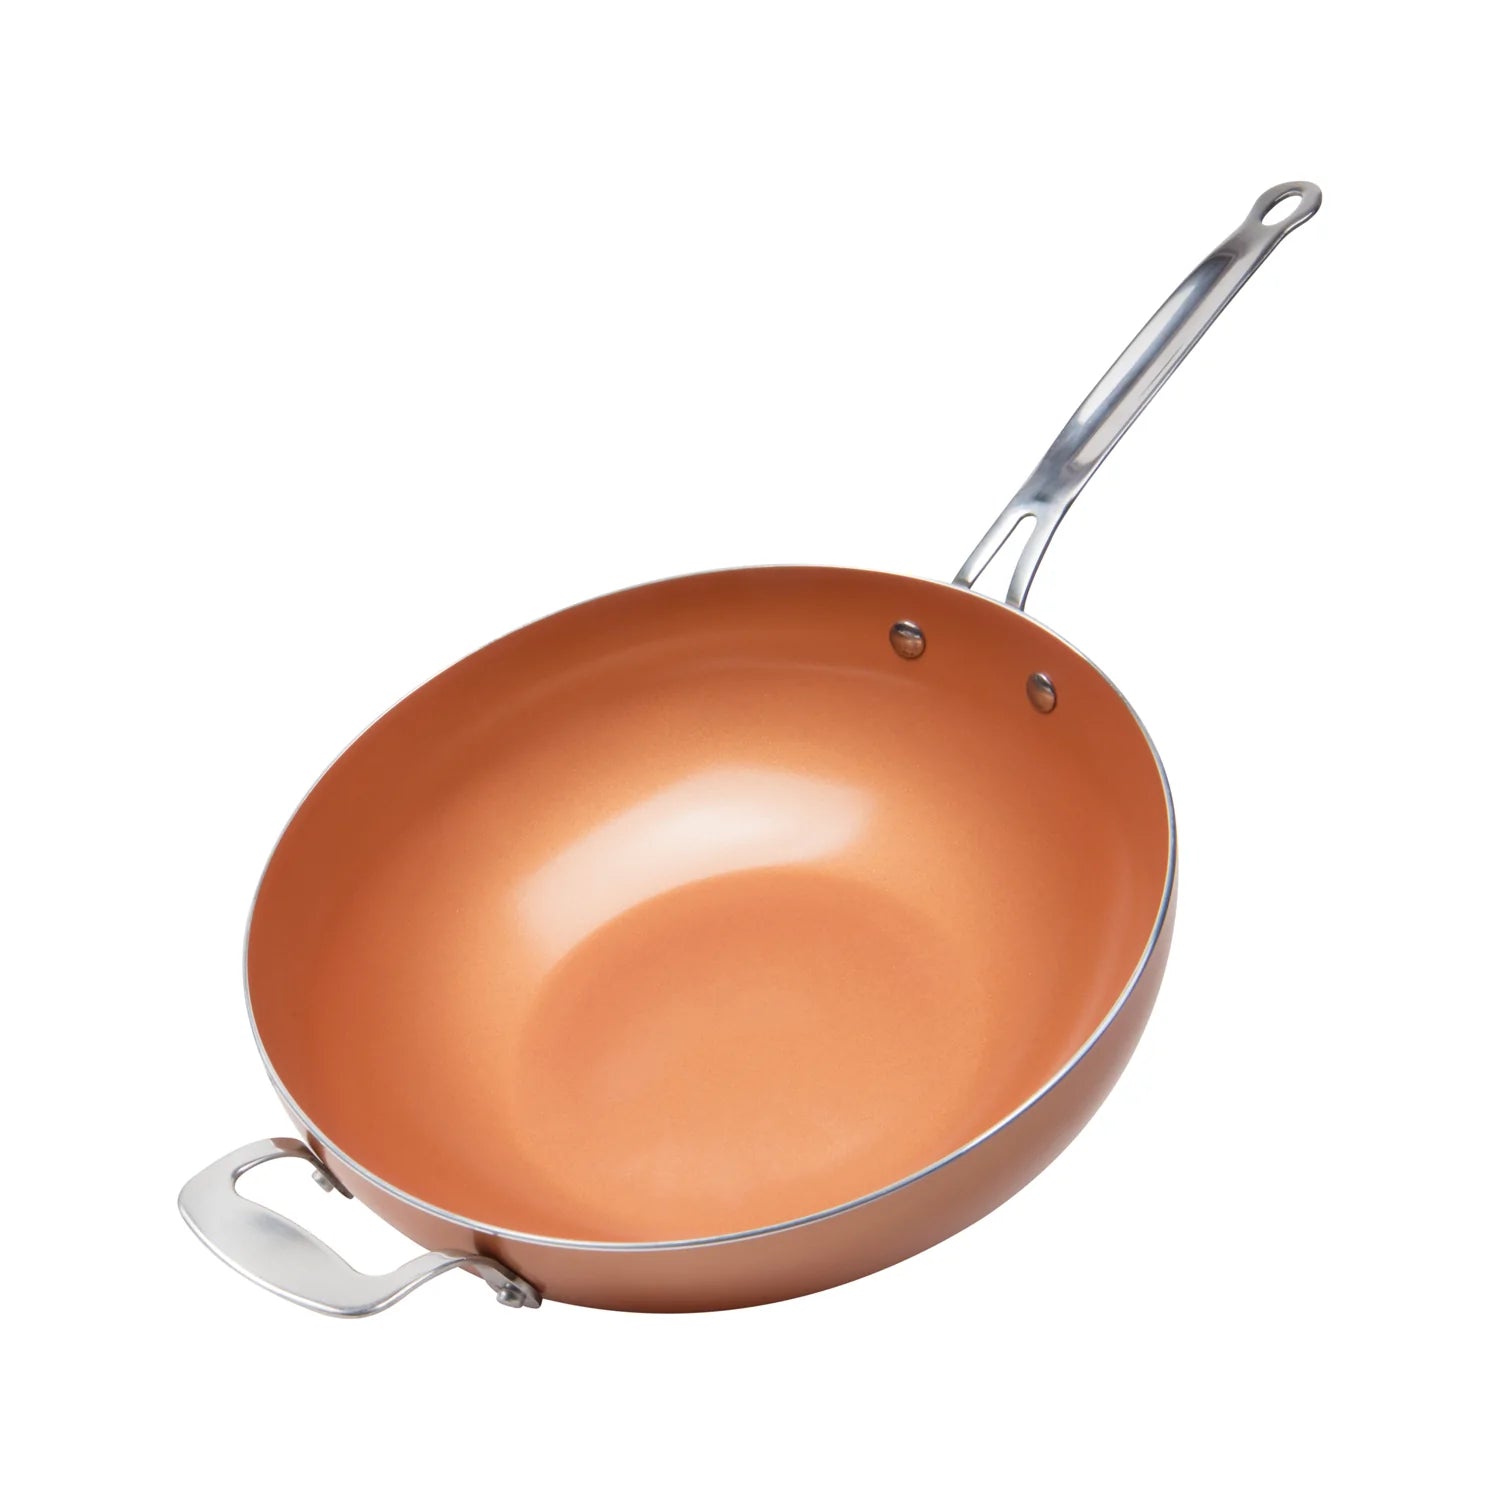 Copper Ceramic Non-Stick 25cm Skillet Frying Pan w/ Induction Bottom Oven Safe Stainless Steel Handle No Oil/Butter Needed & Dishwasher Safe